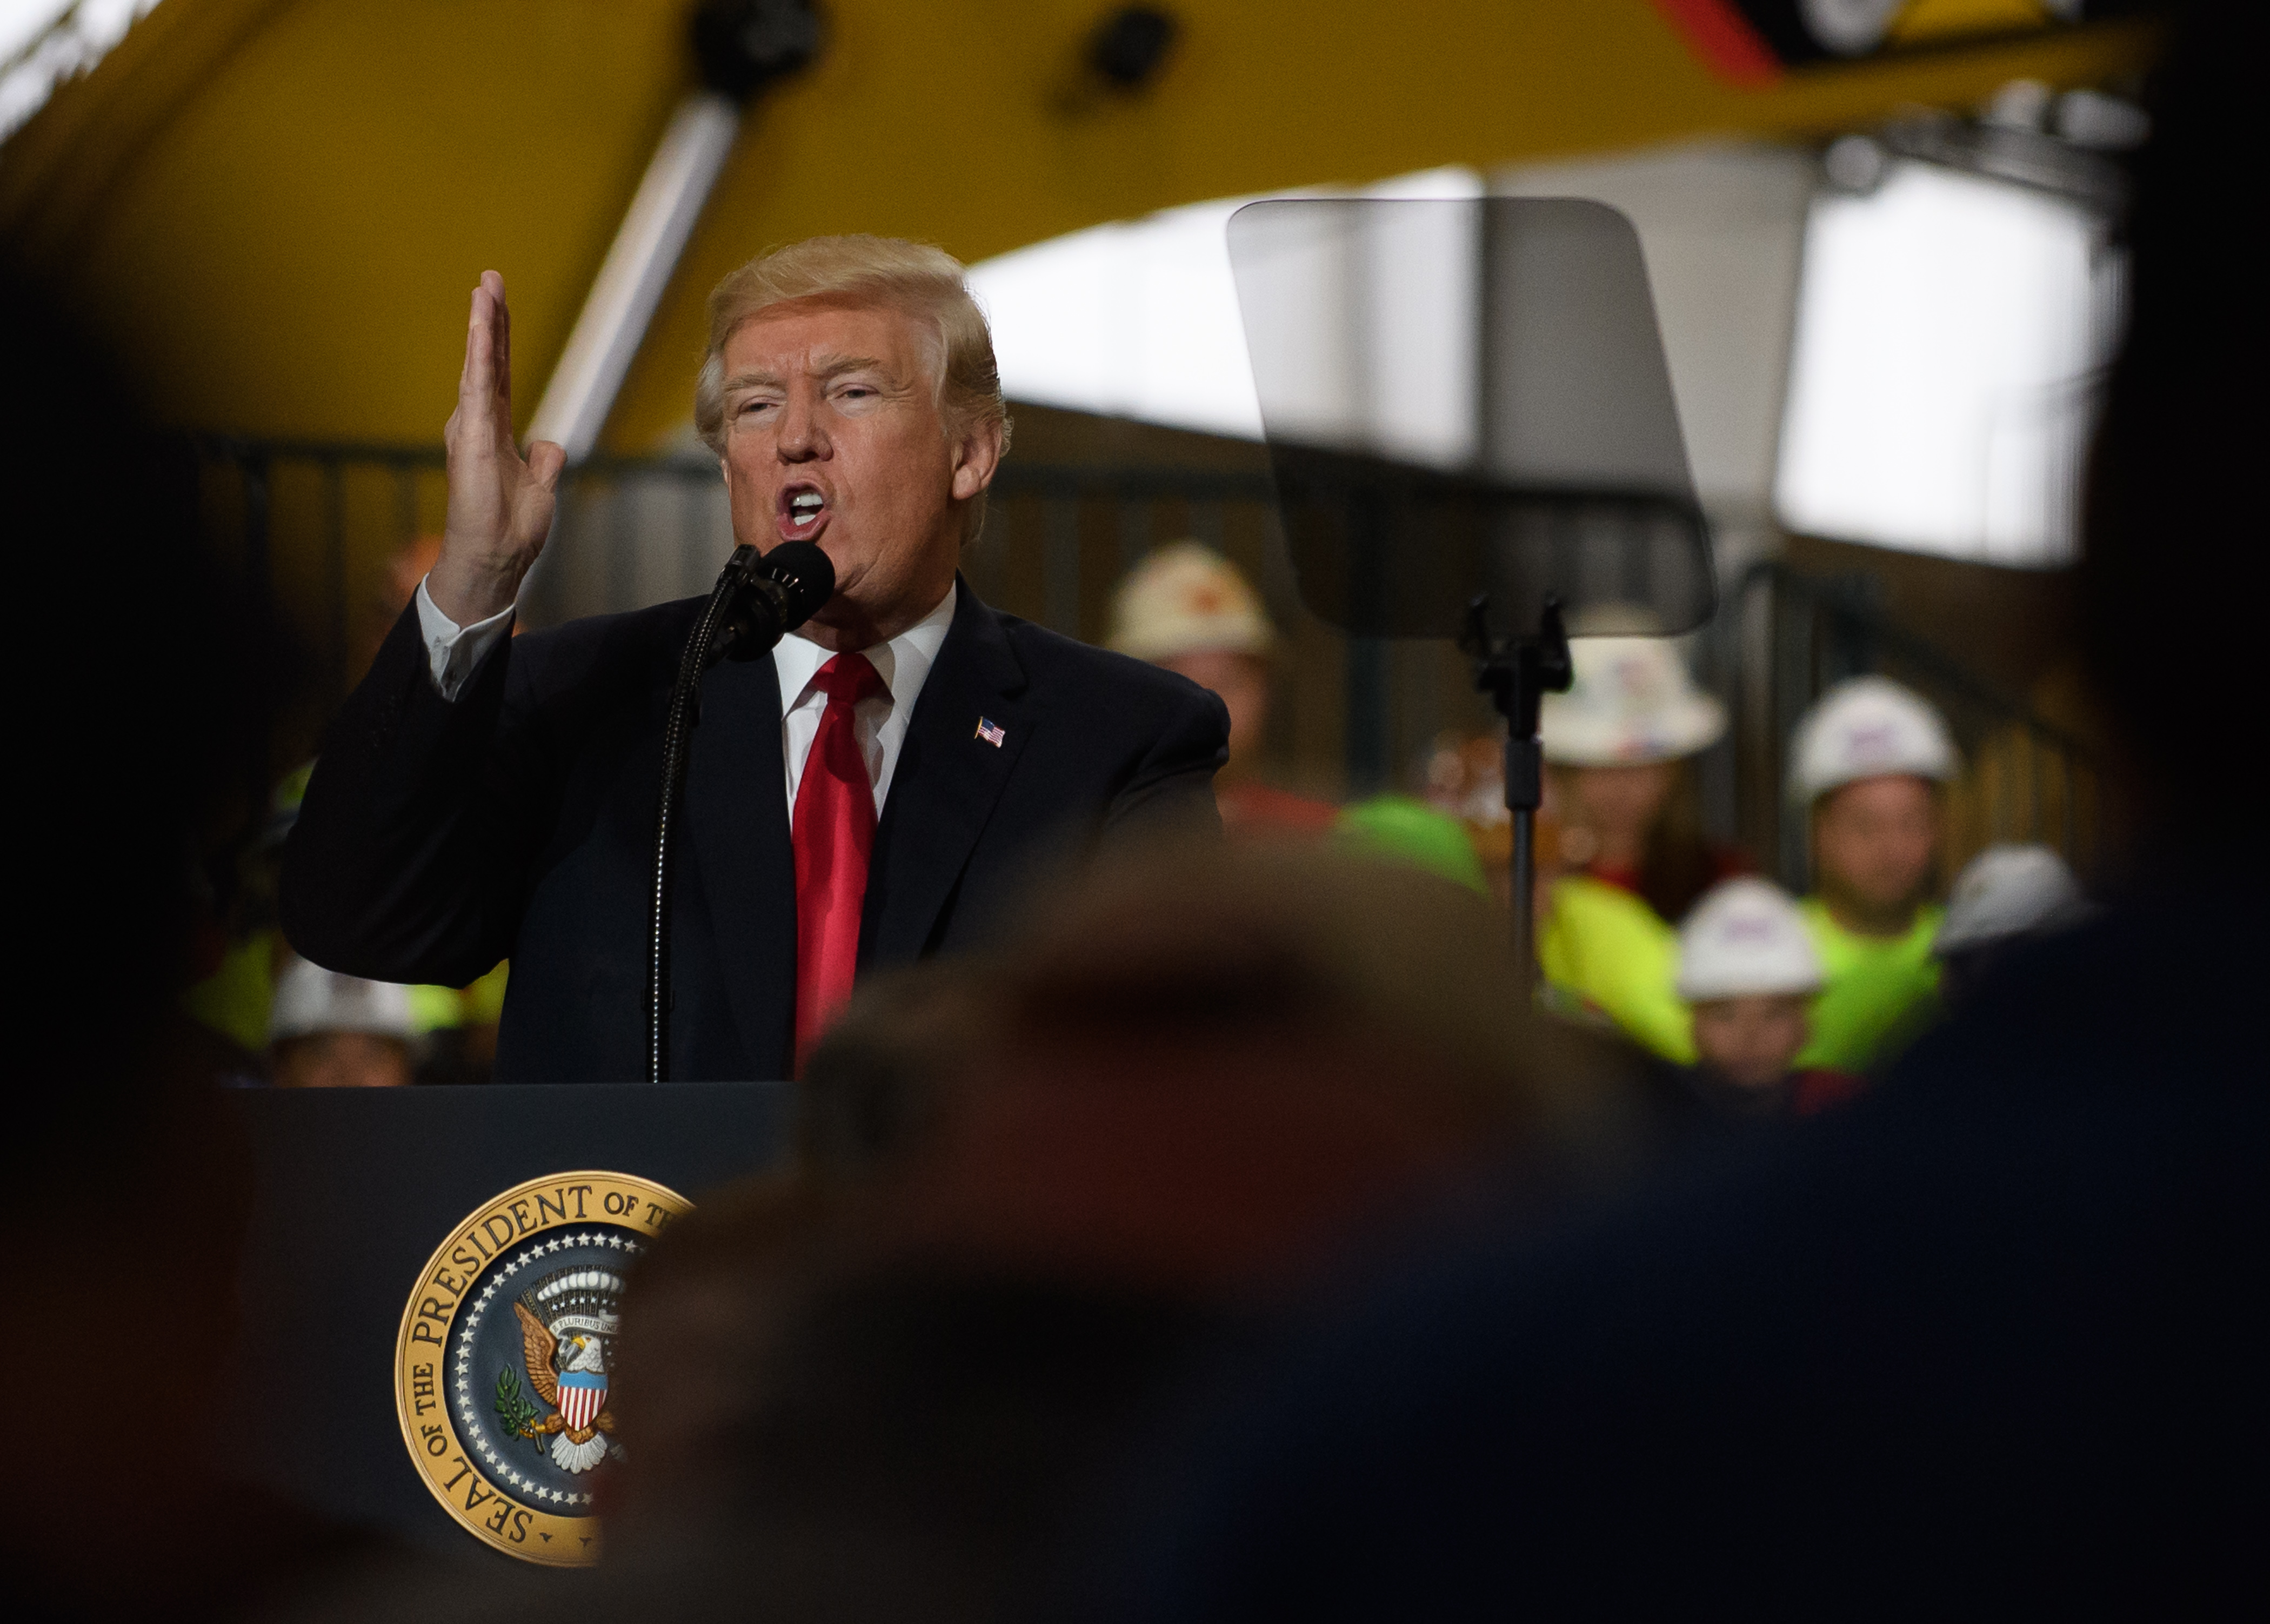 U.S. President Donald Trump speaks to a crowd gathered at the Local 18 Richfield Facility of the Operating Engineers Apprentice and Training, a union and apprentice training center specializing in the repair and operation of heavy equipment on March 29, 2018 in Richfield, Ohio. (Jeff Swensen&mdash;Getty Images)